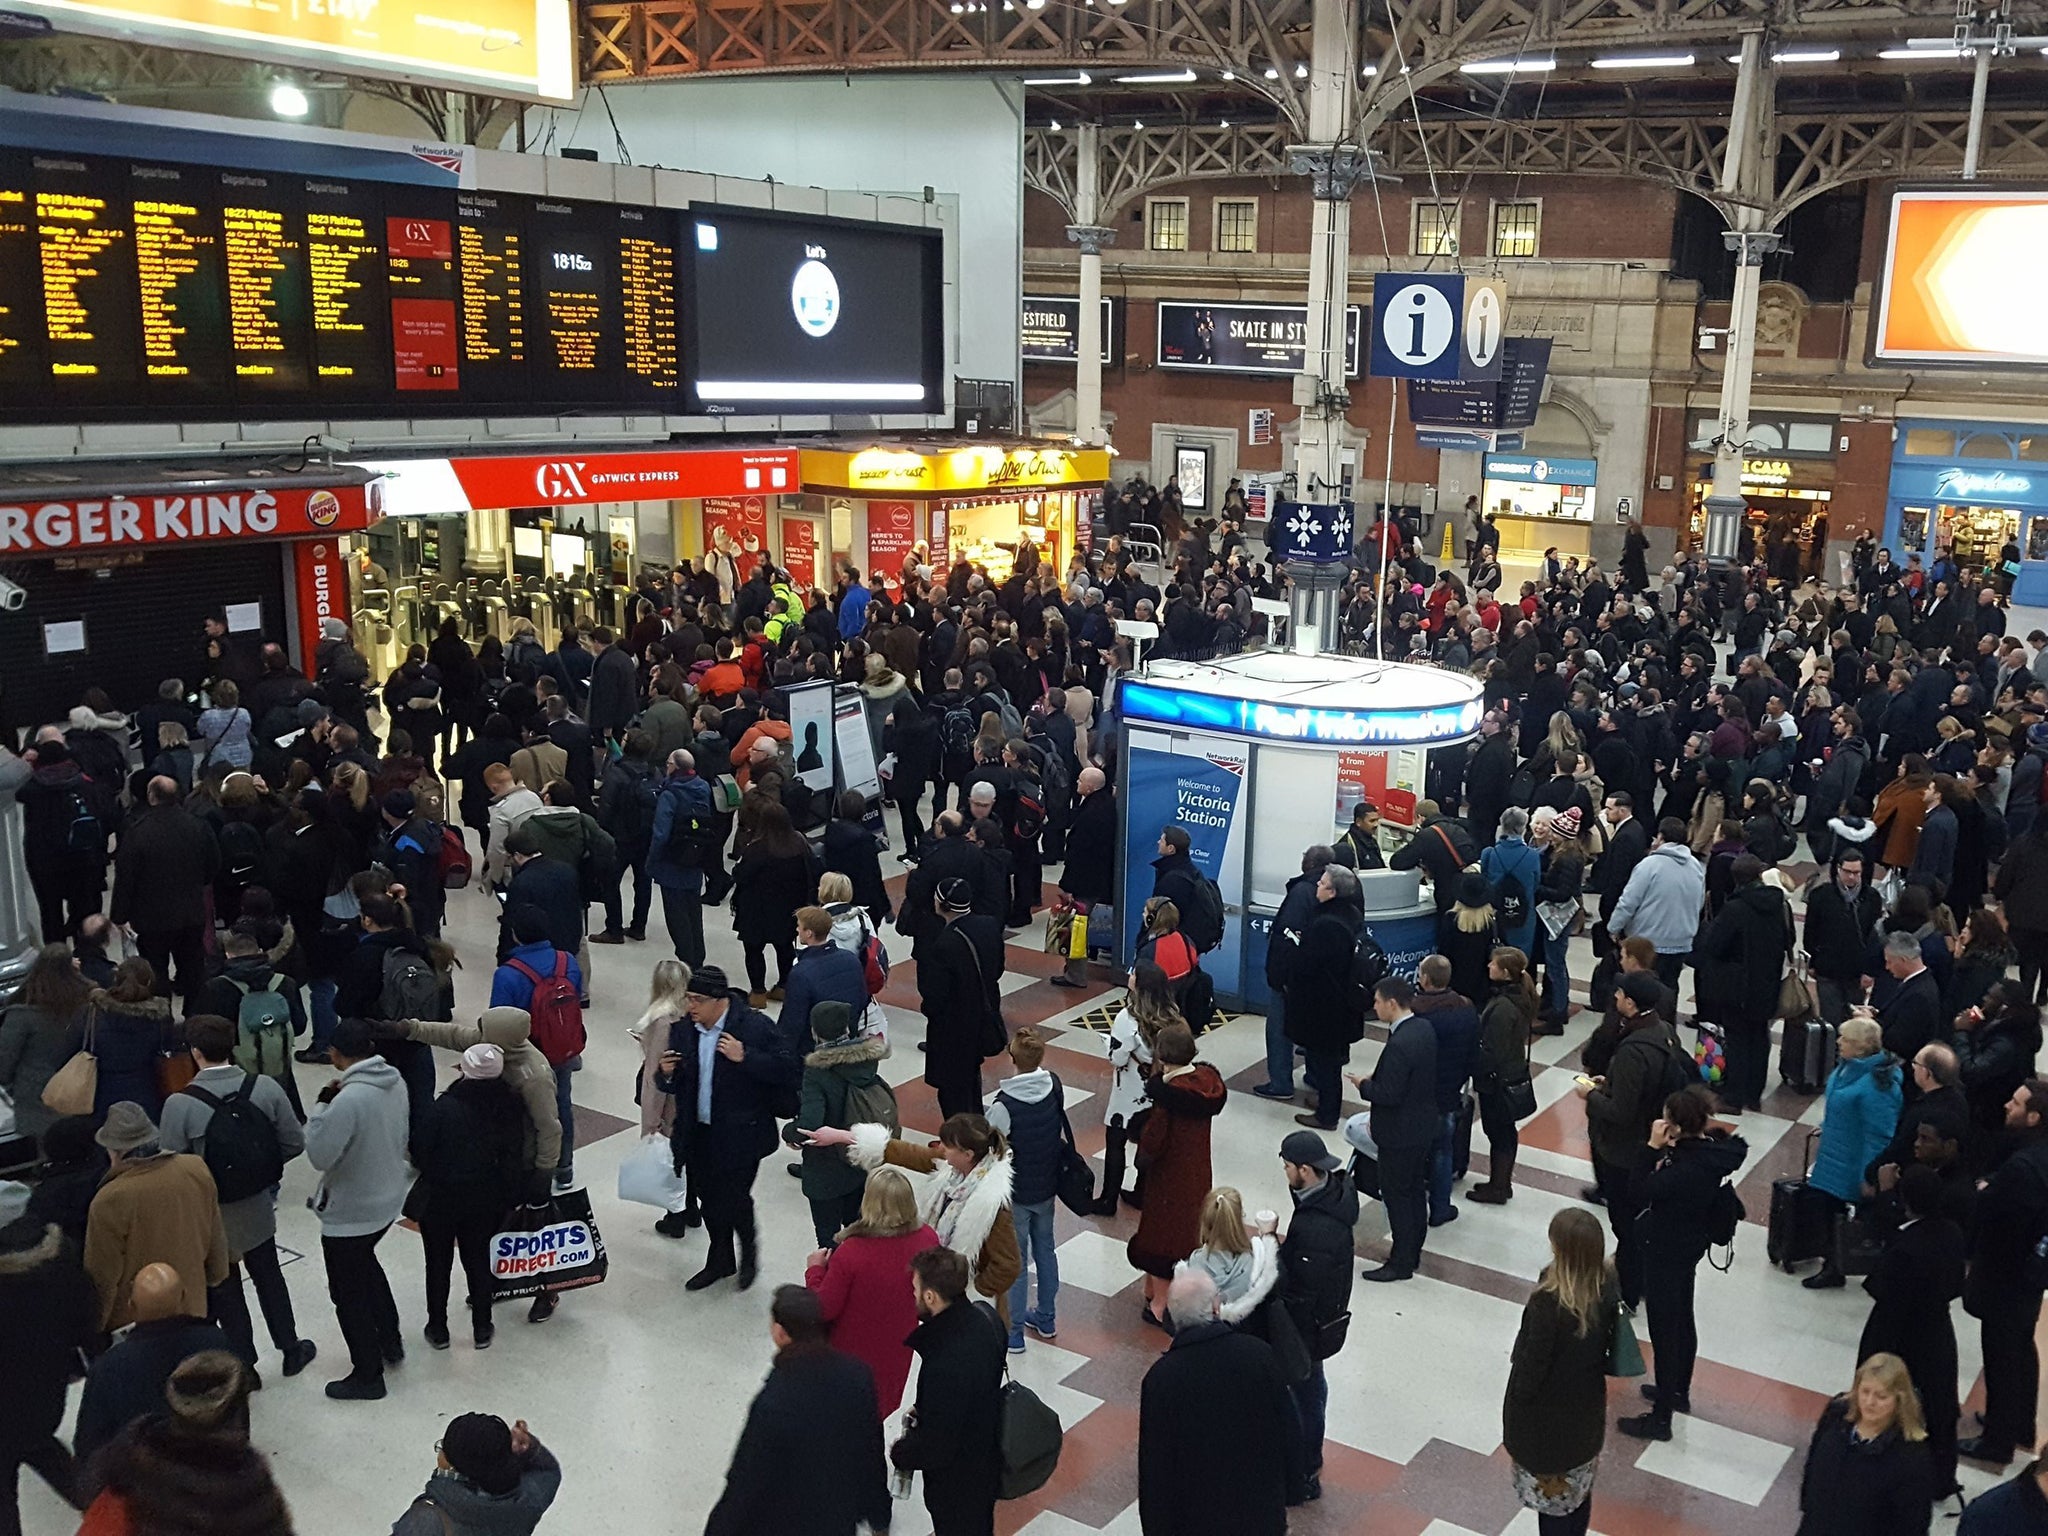 Stranded commuters at London Victoria railway station